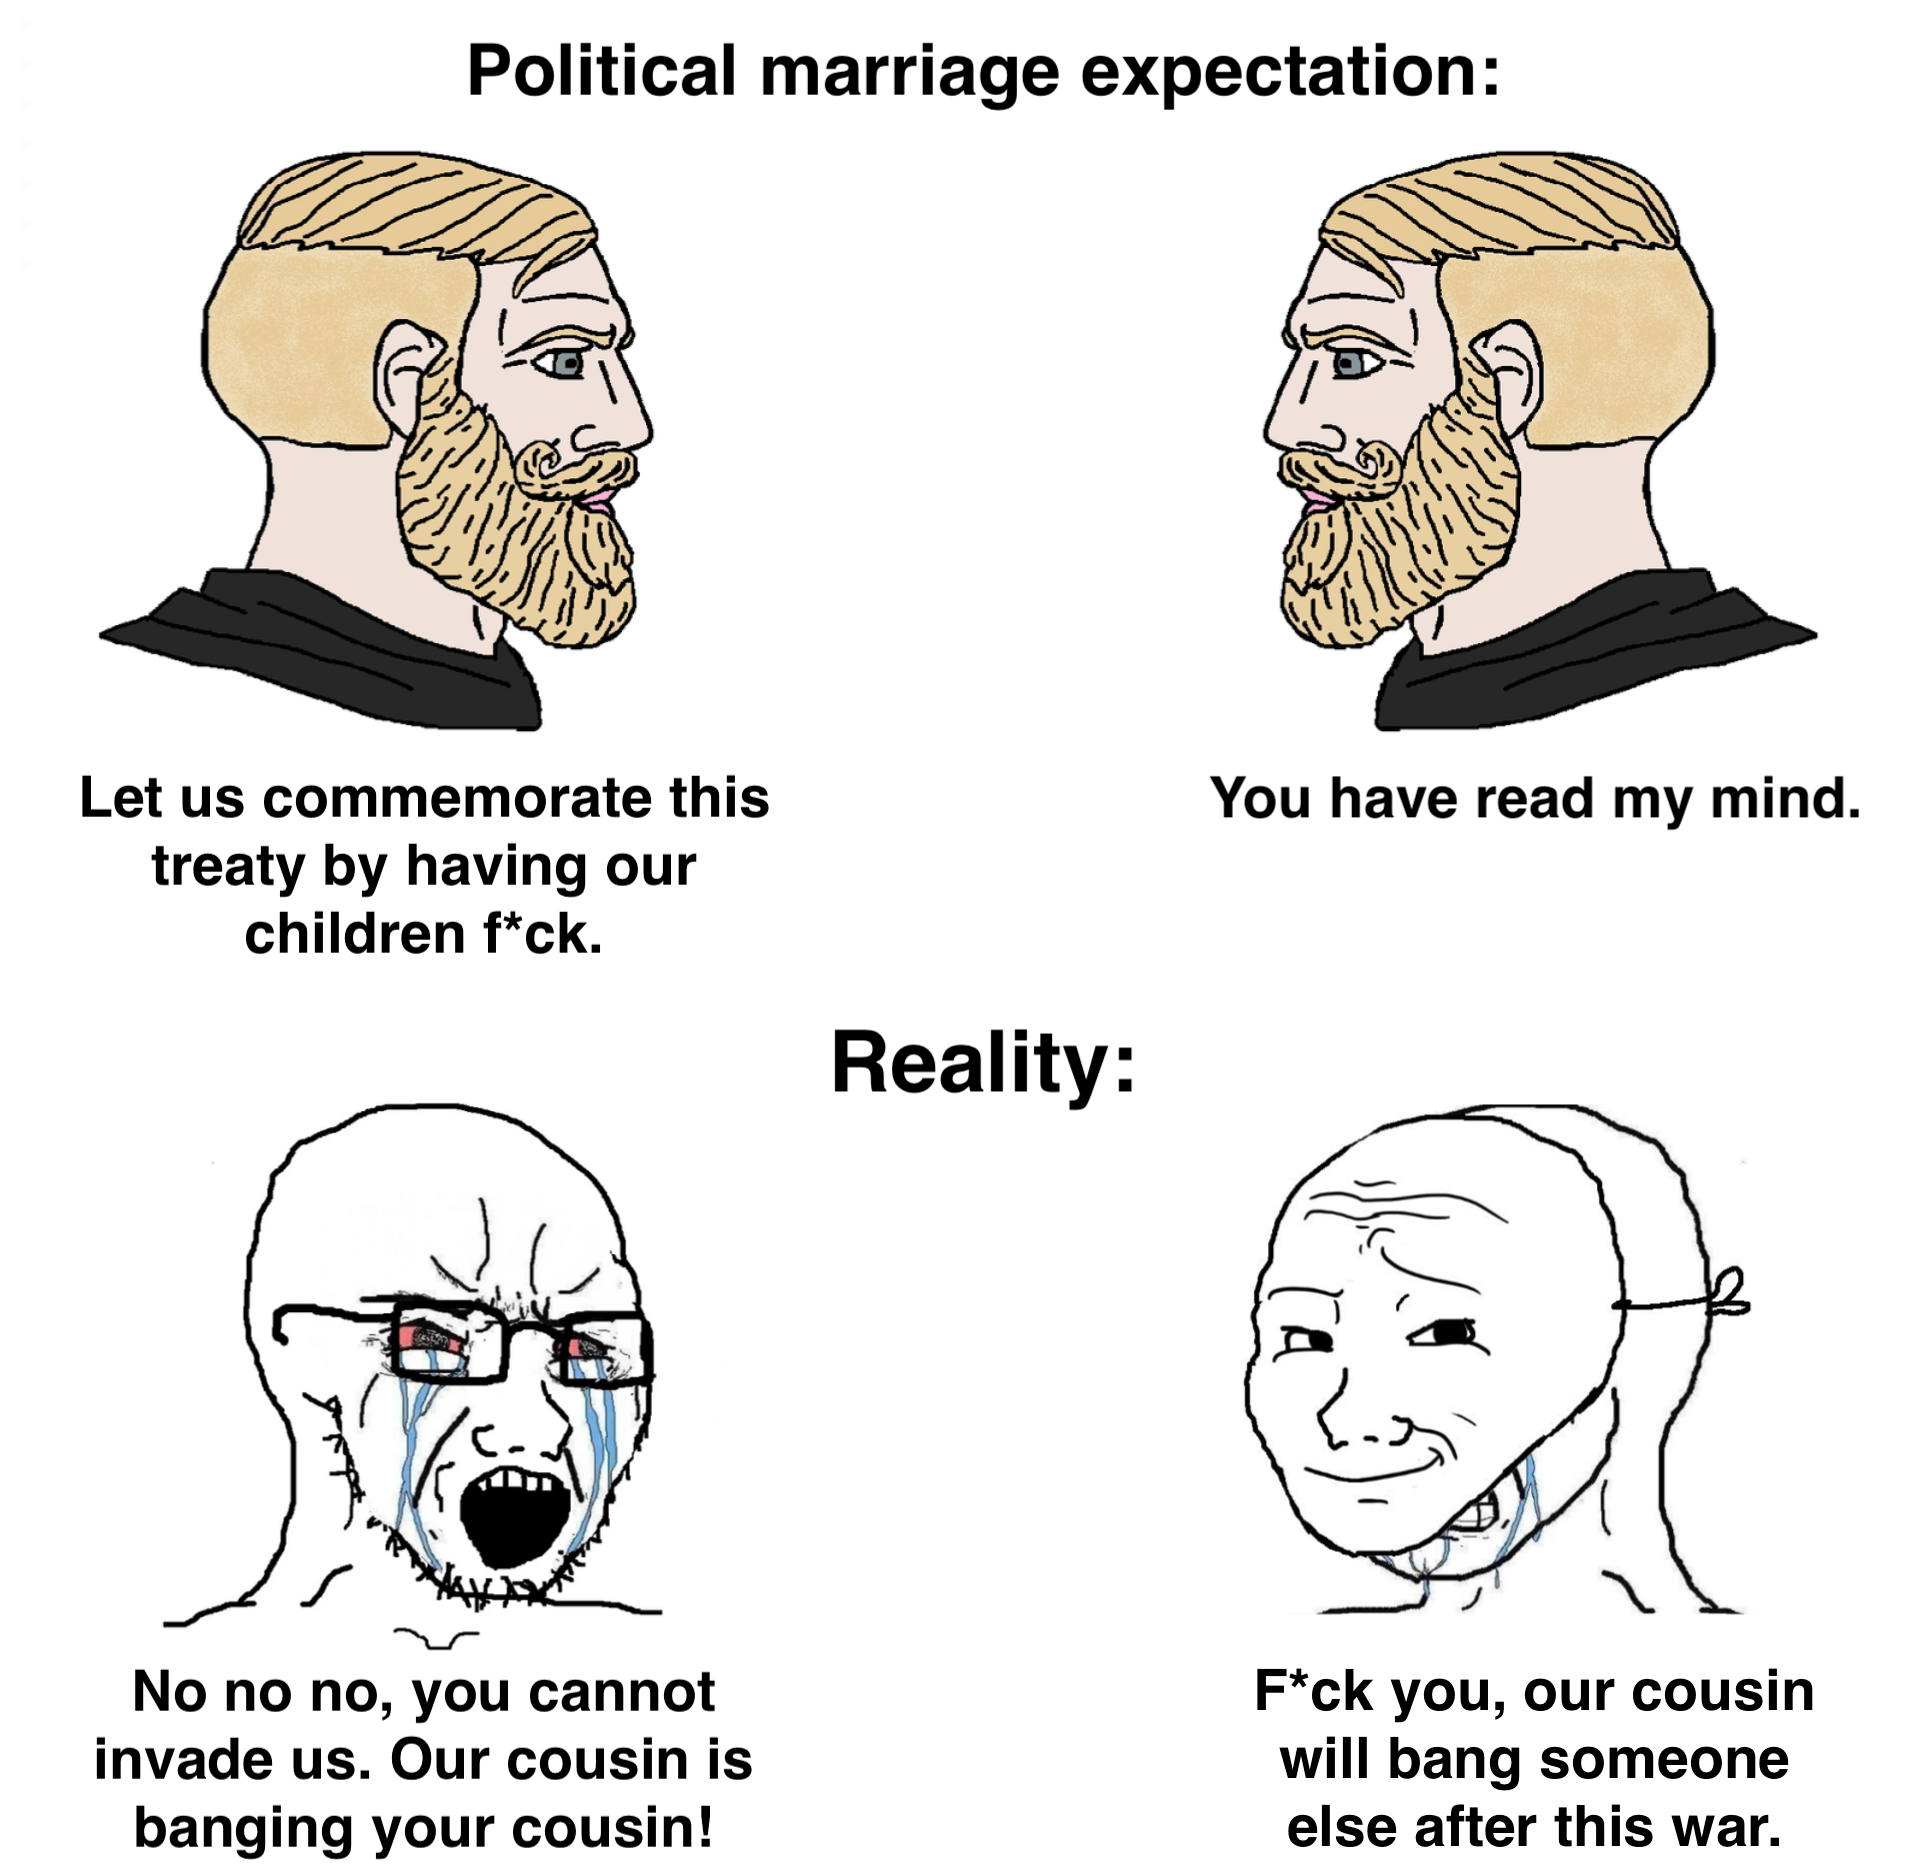 Ancient and medieval political marriage in a nutshell.....